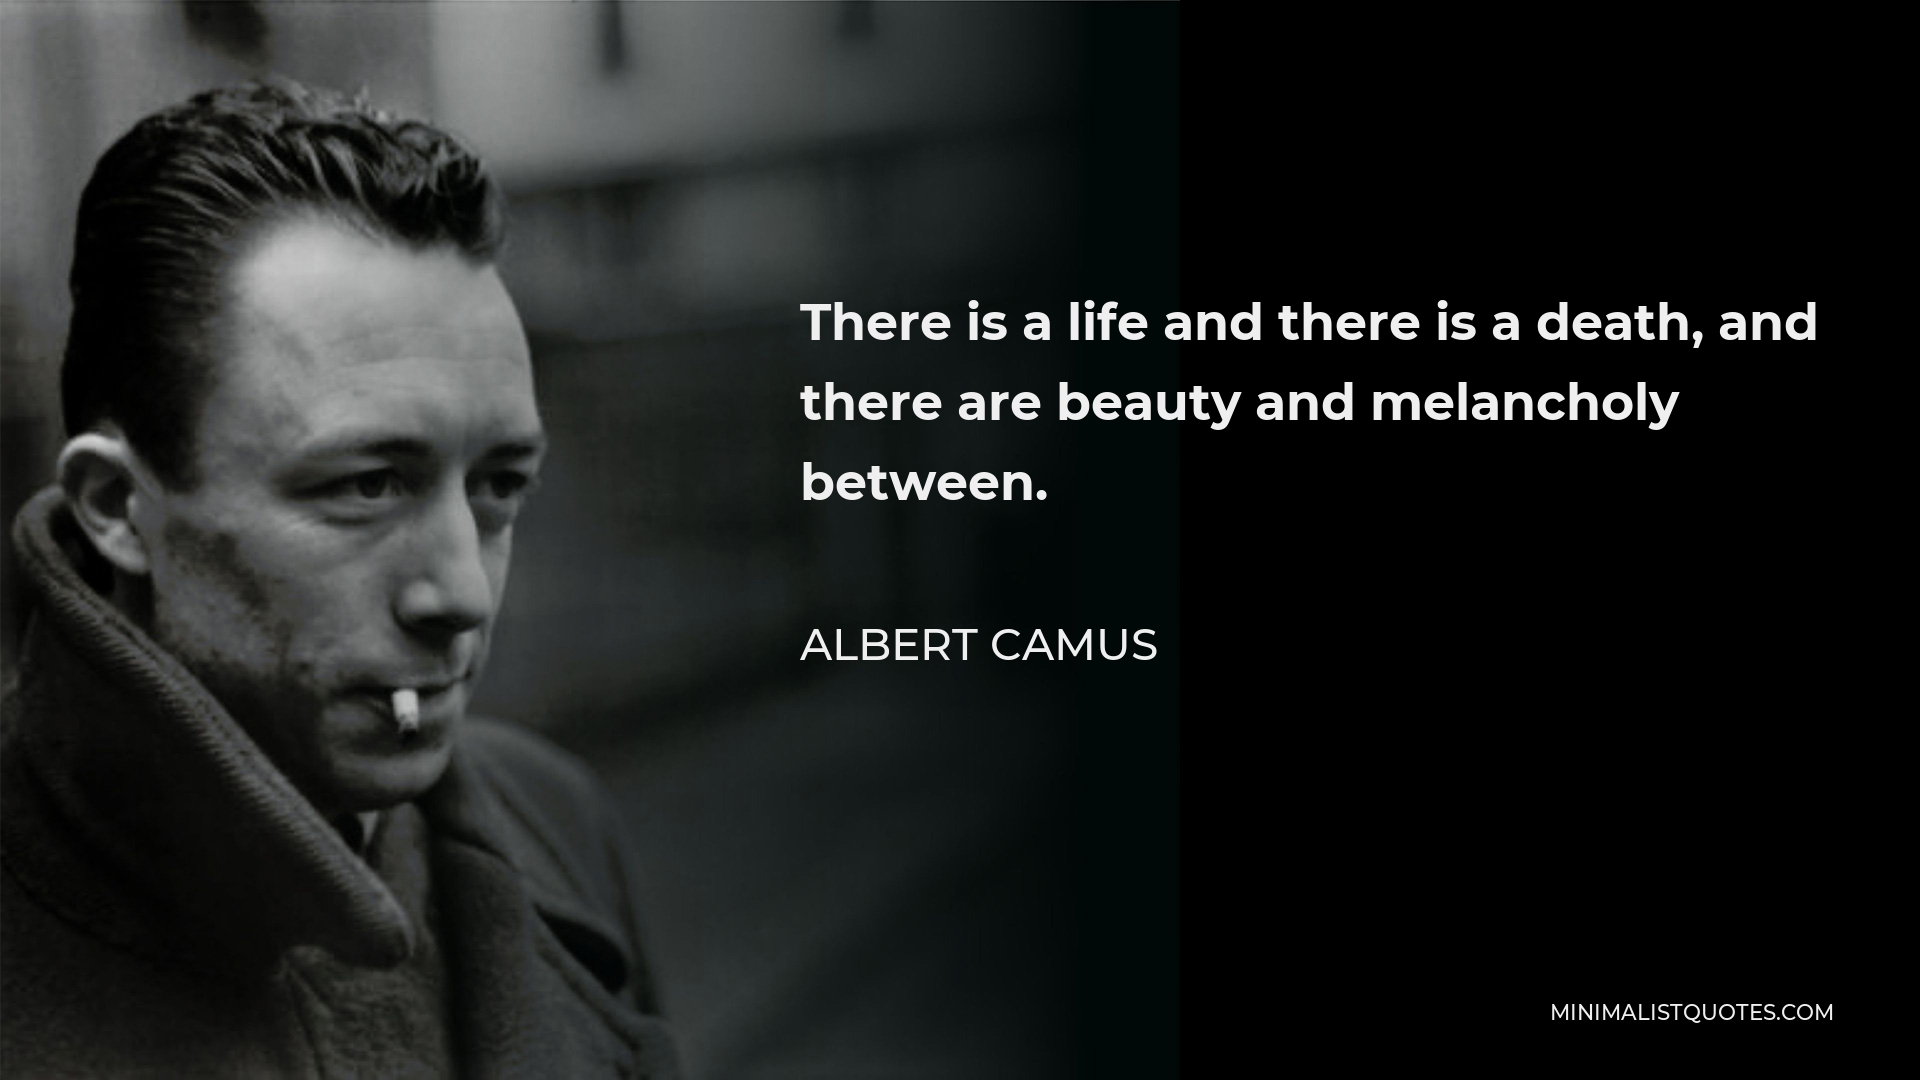 Albert Camus Quote - There is a life and there is a death, and there are beauty and melancholy between.